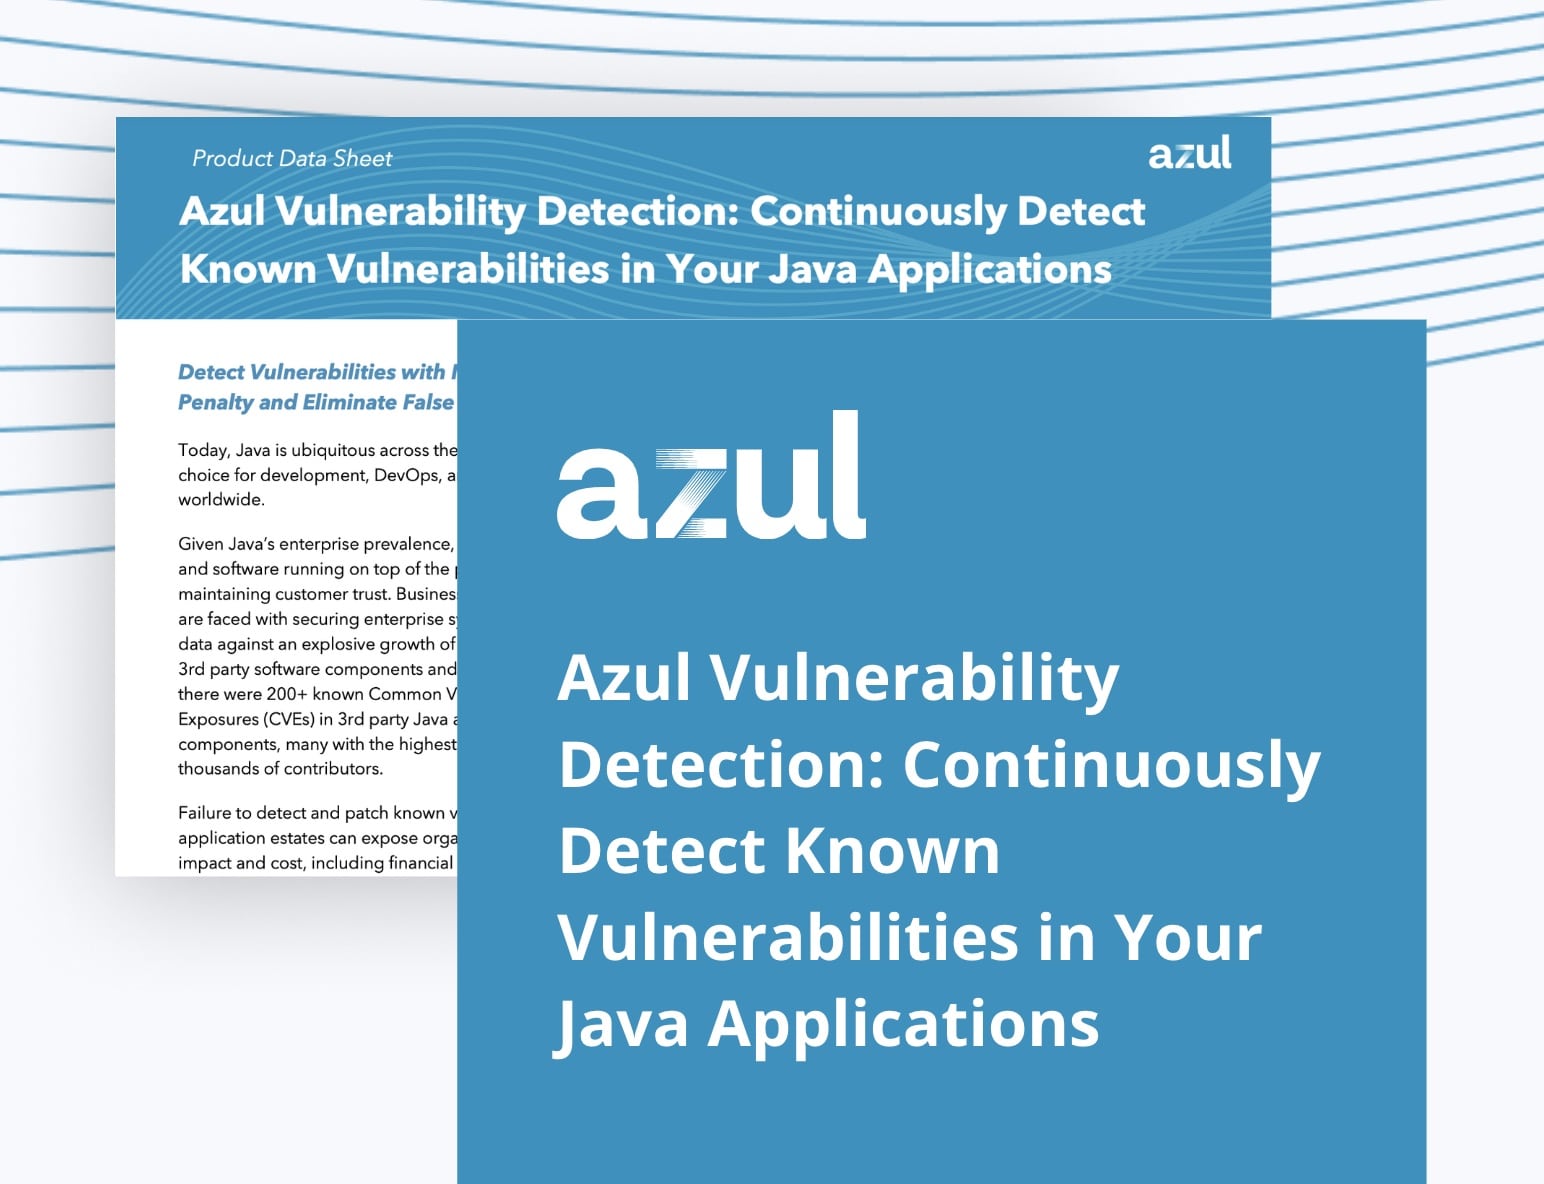 Azul Vulnerability Detection: Continuously Detect Known Vulnerabilities in Your Java Applications